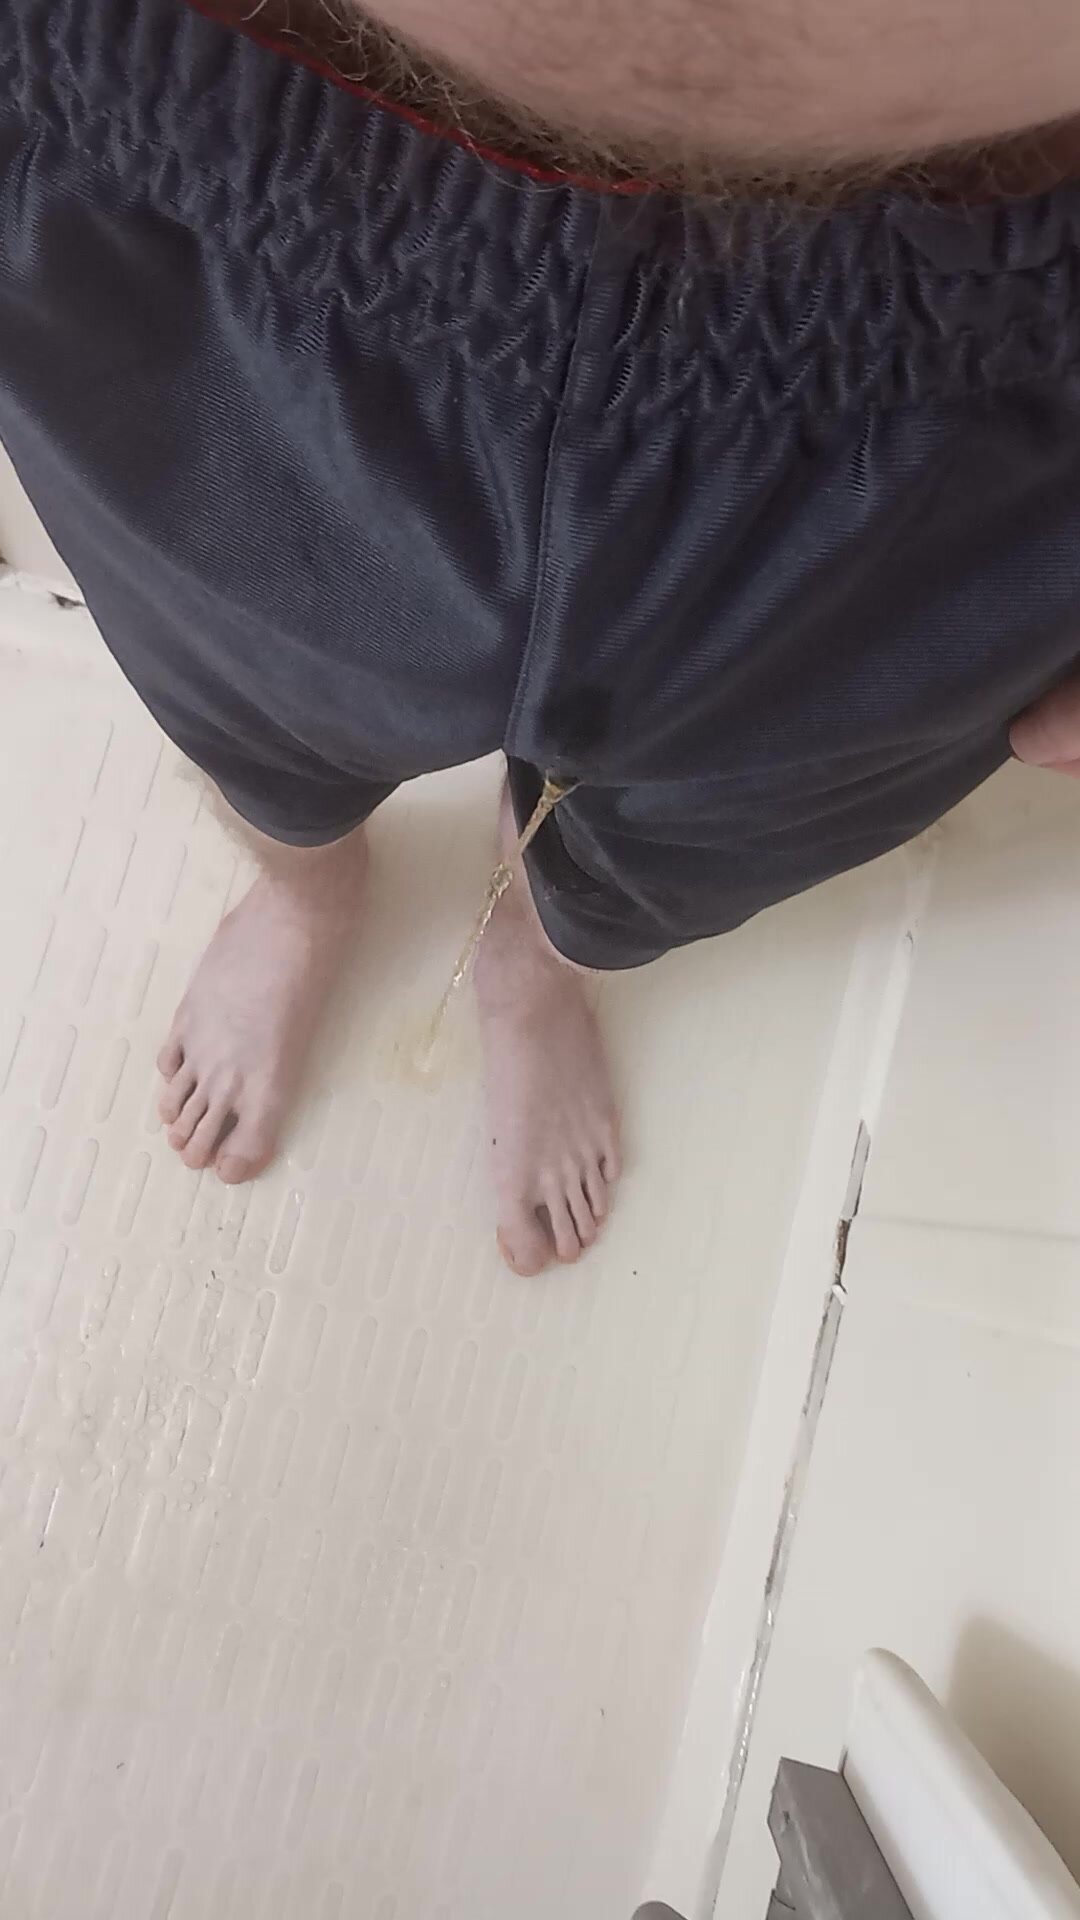 Pissing in my smelly shorts